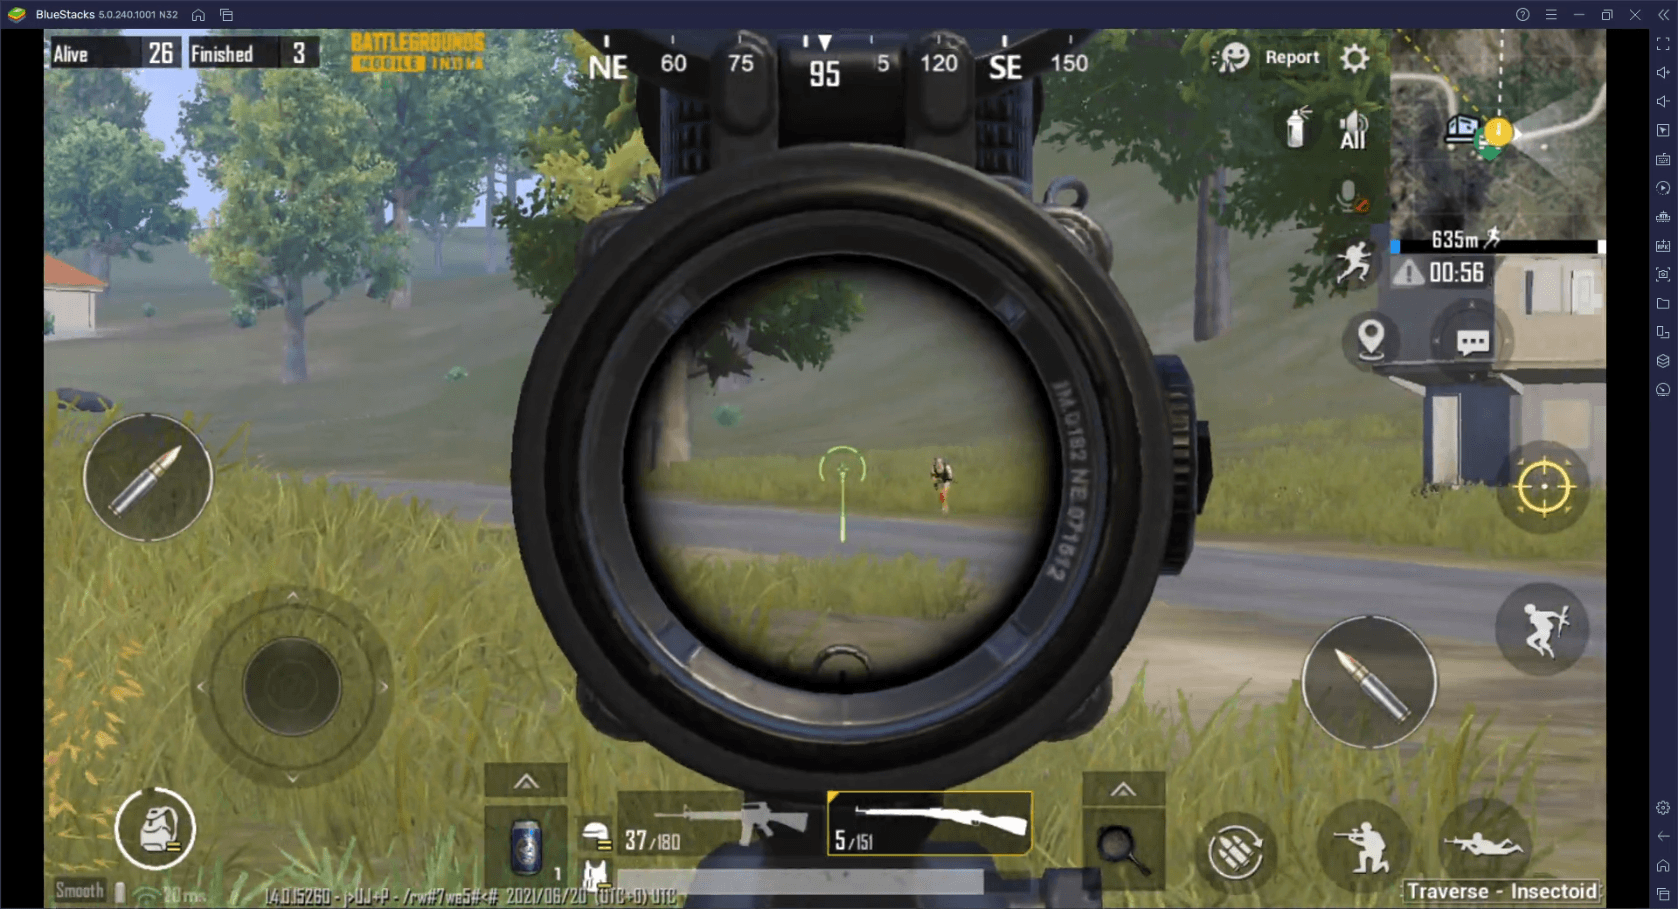 Battlegrounds Mobile India - The Best BGMI Tips and Tricks For Winning Endless Chicken Dinners